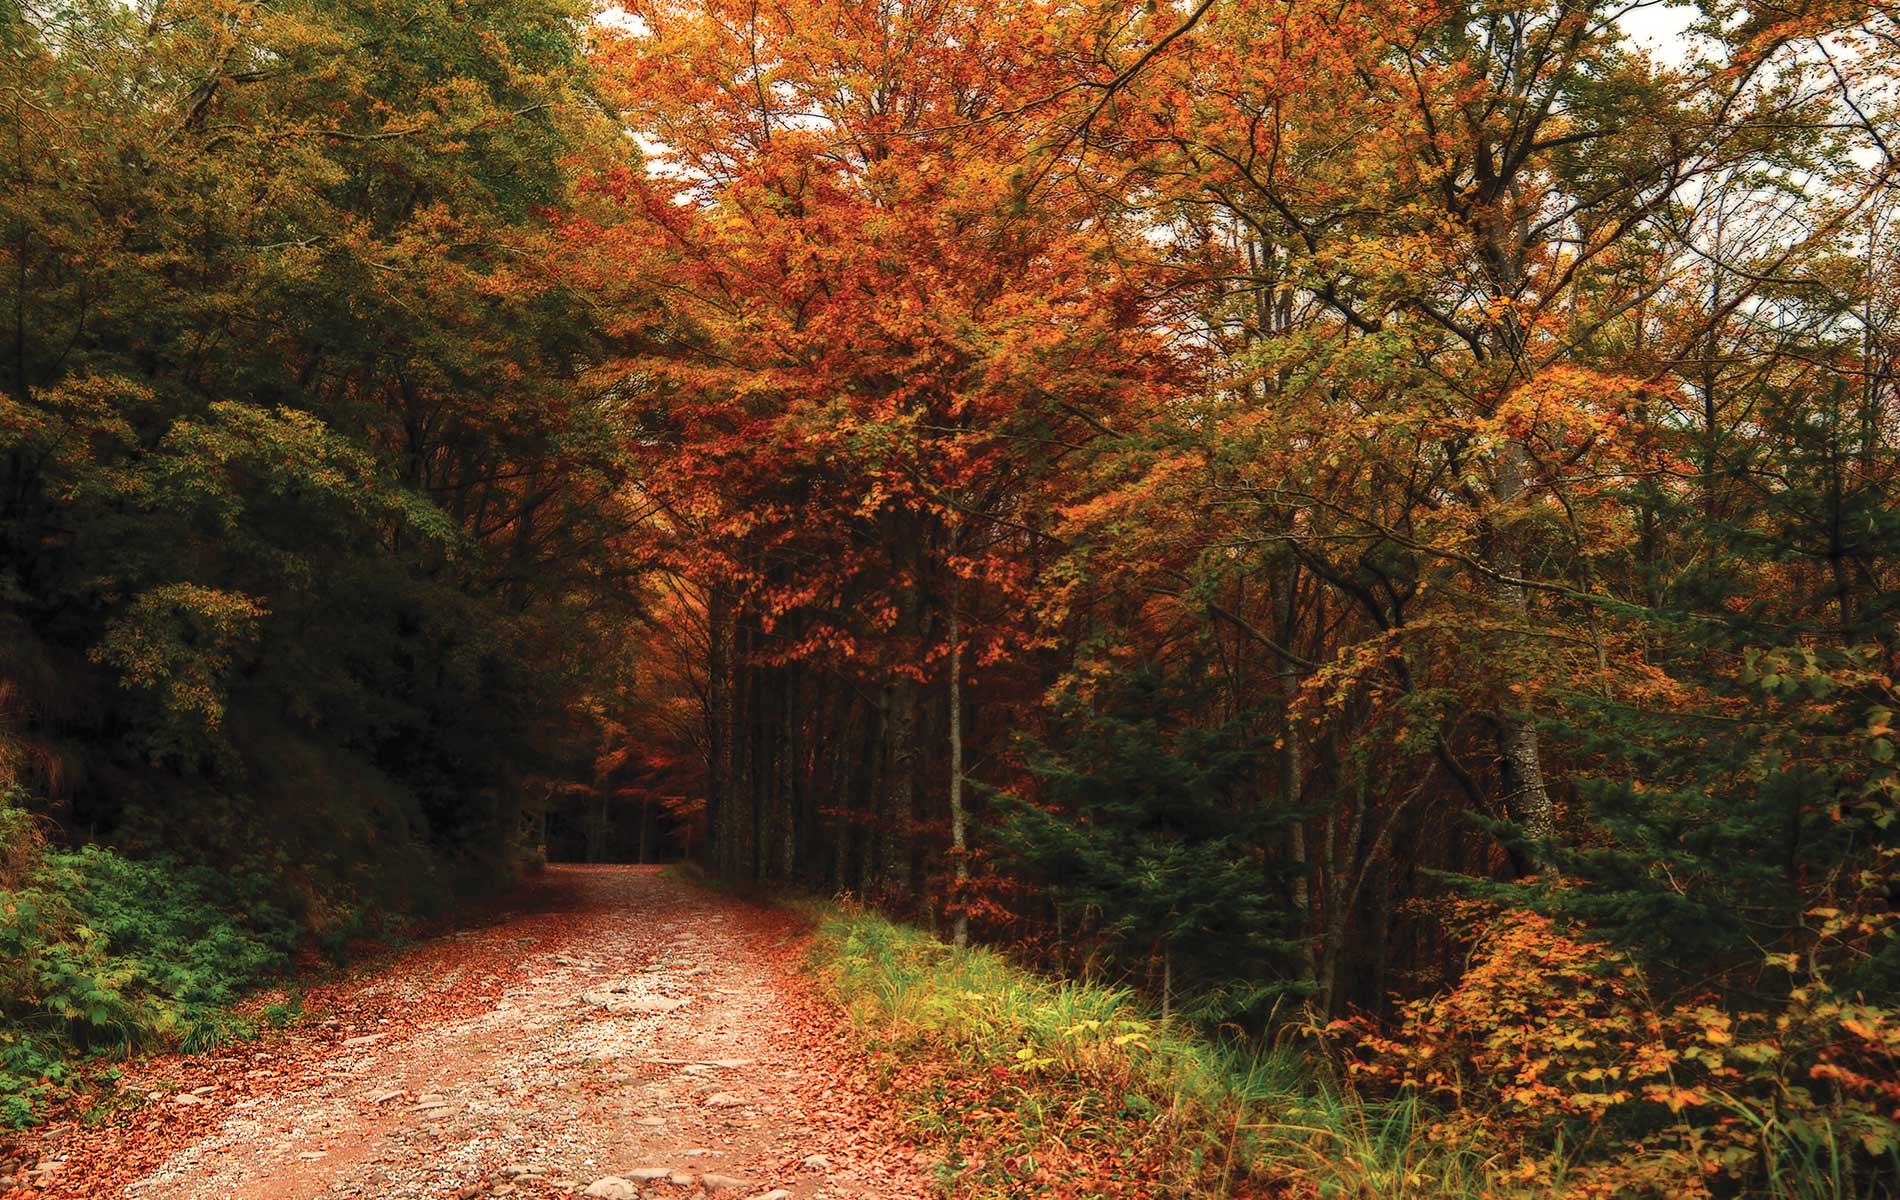 A autumn forest trail near the Marriott Renaissance Tuscany full of green and orange leafed trees